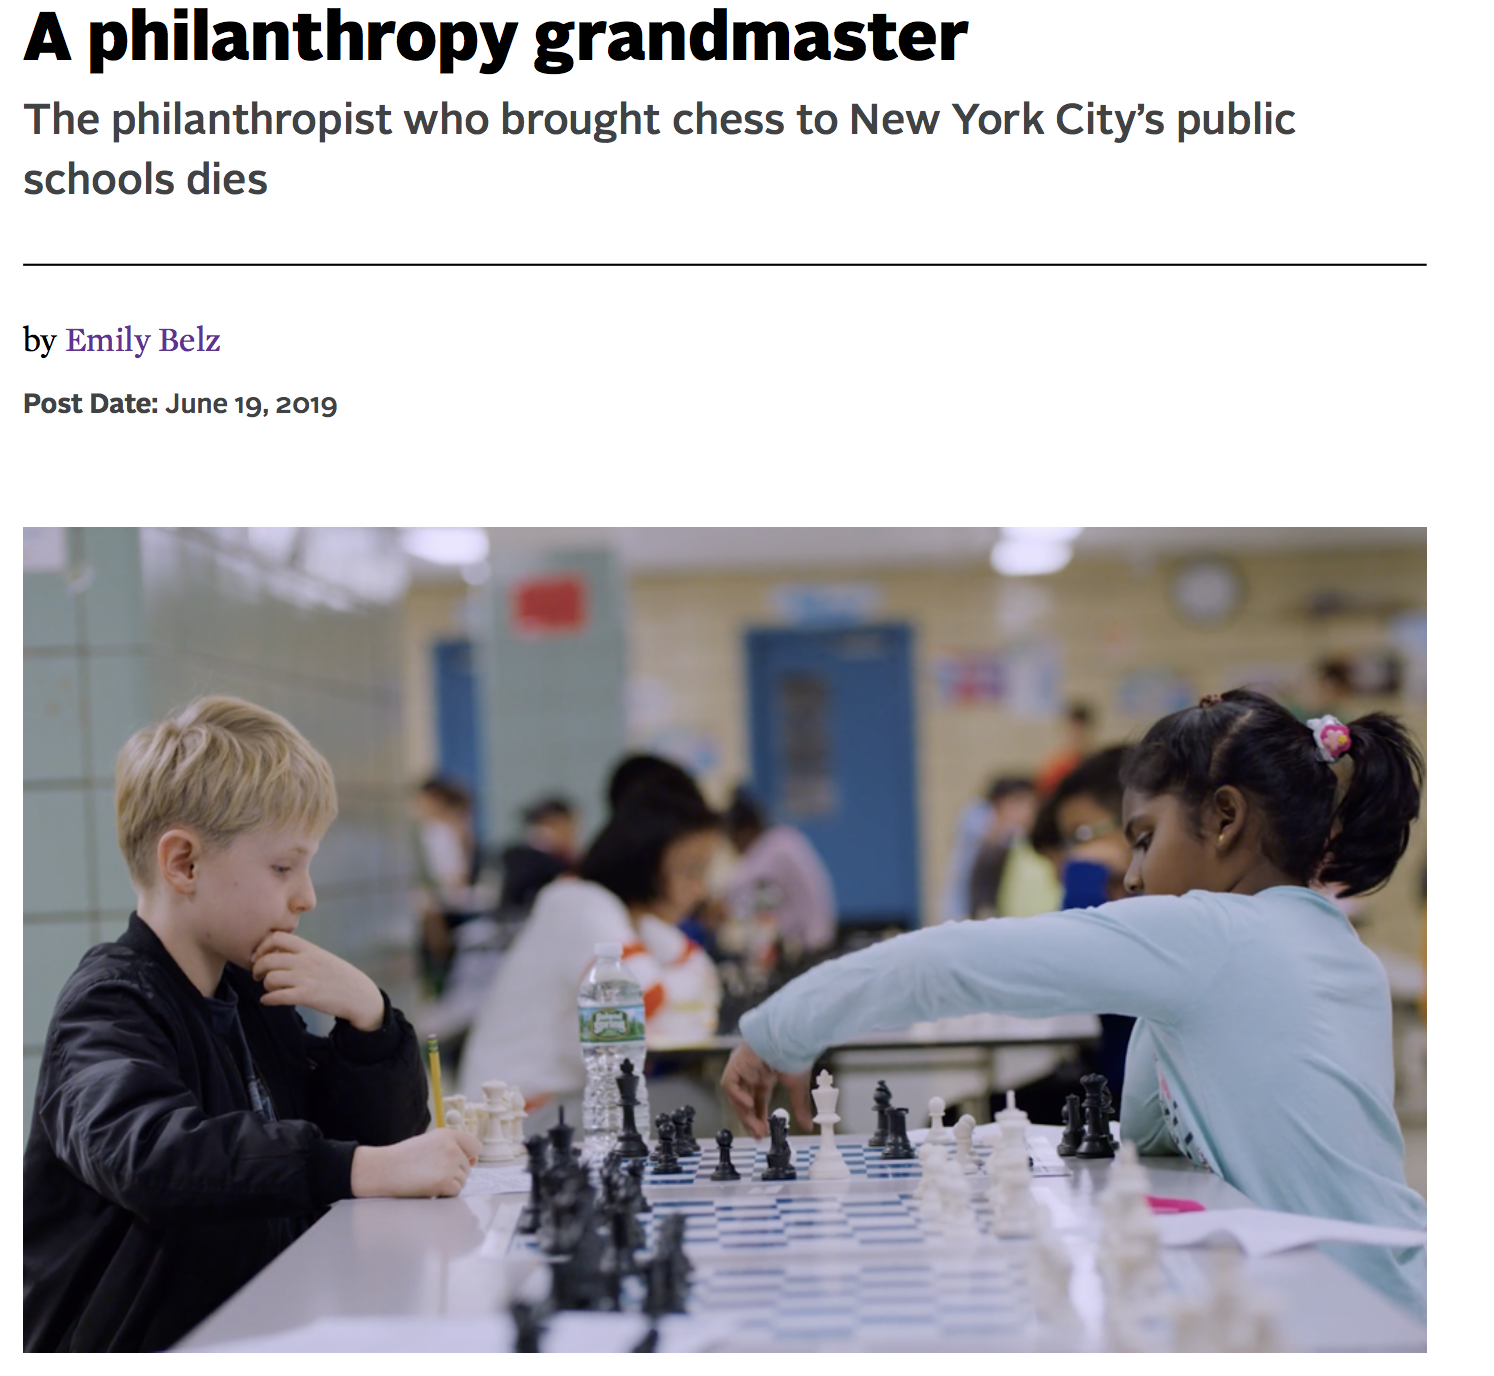 Image for A Philanthropy Grandmaster by Emily Belz